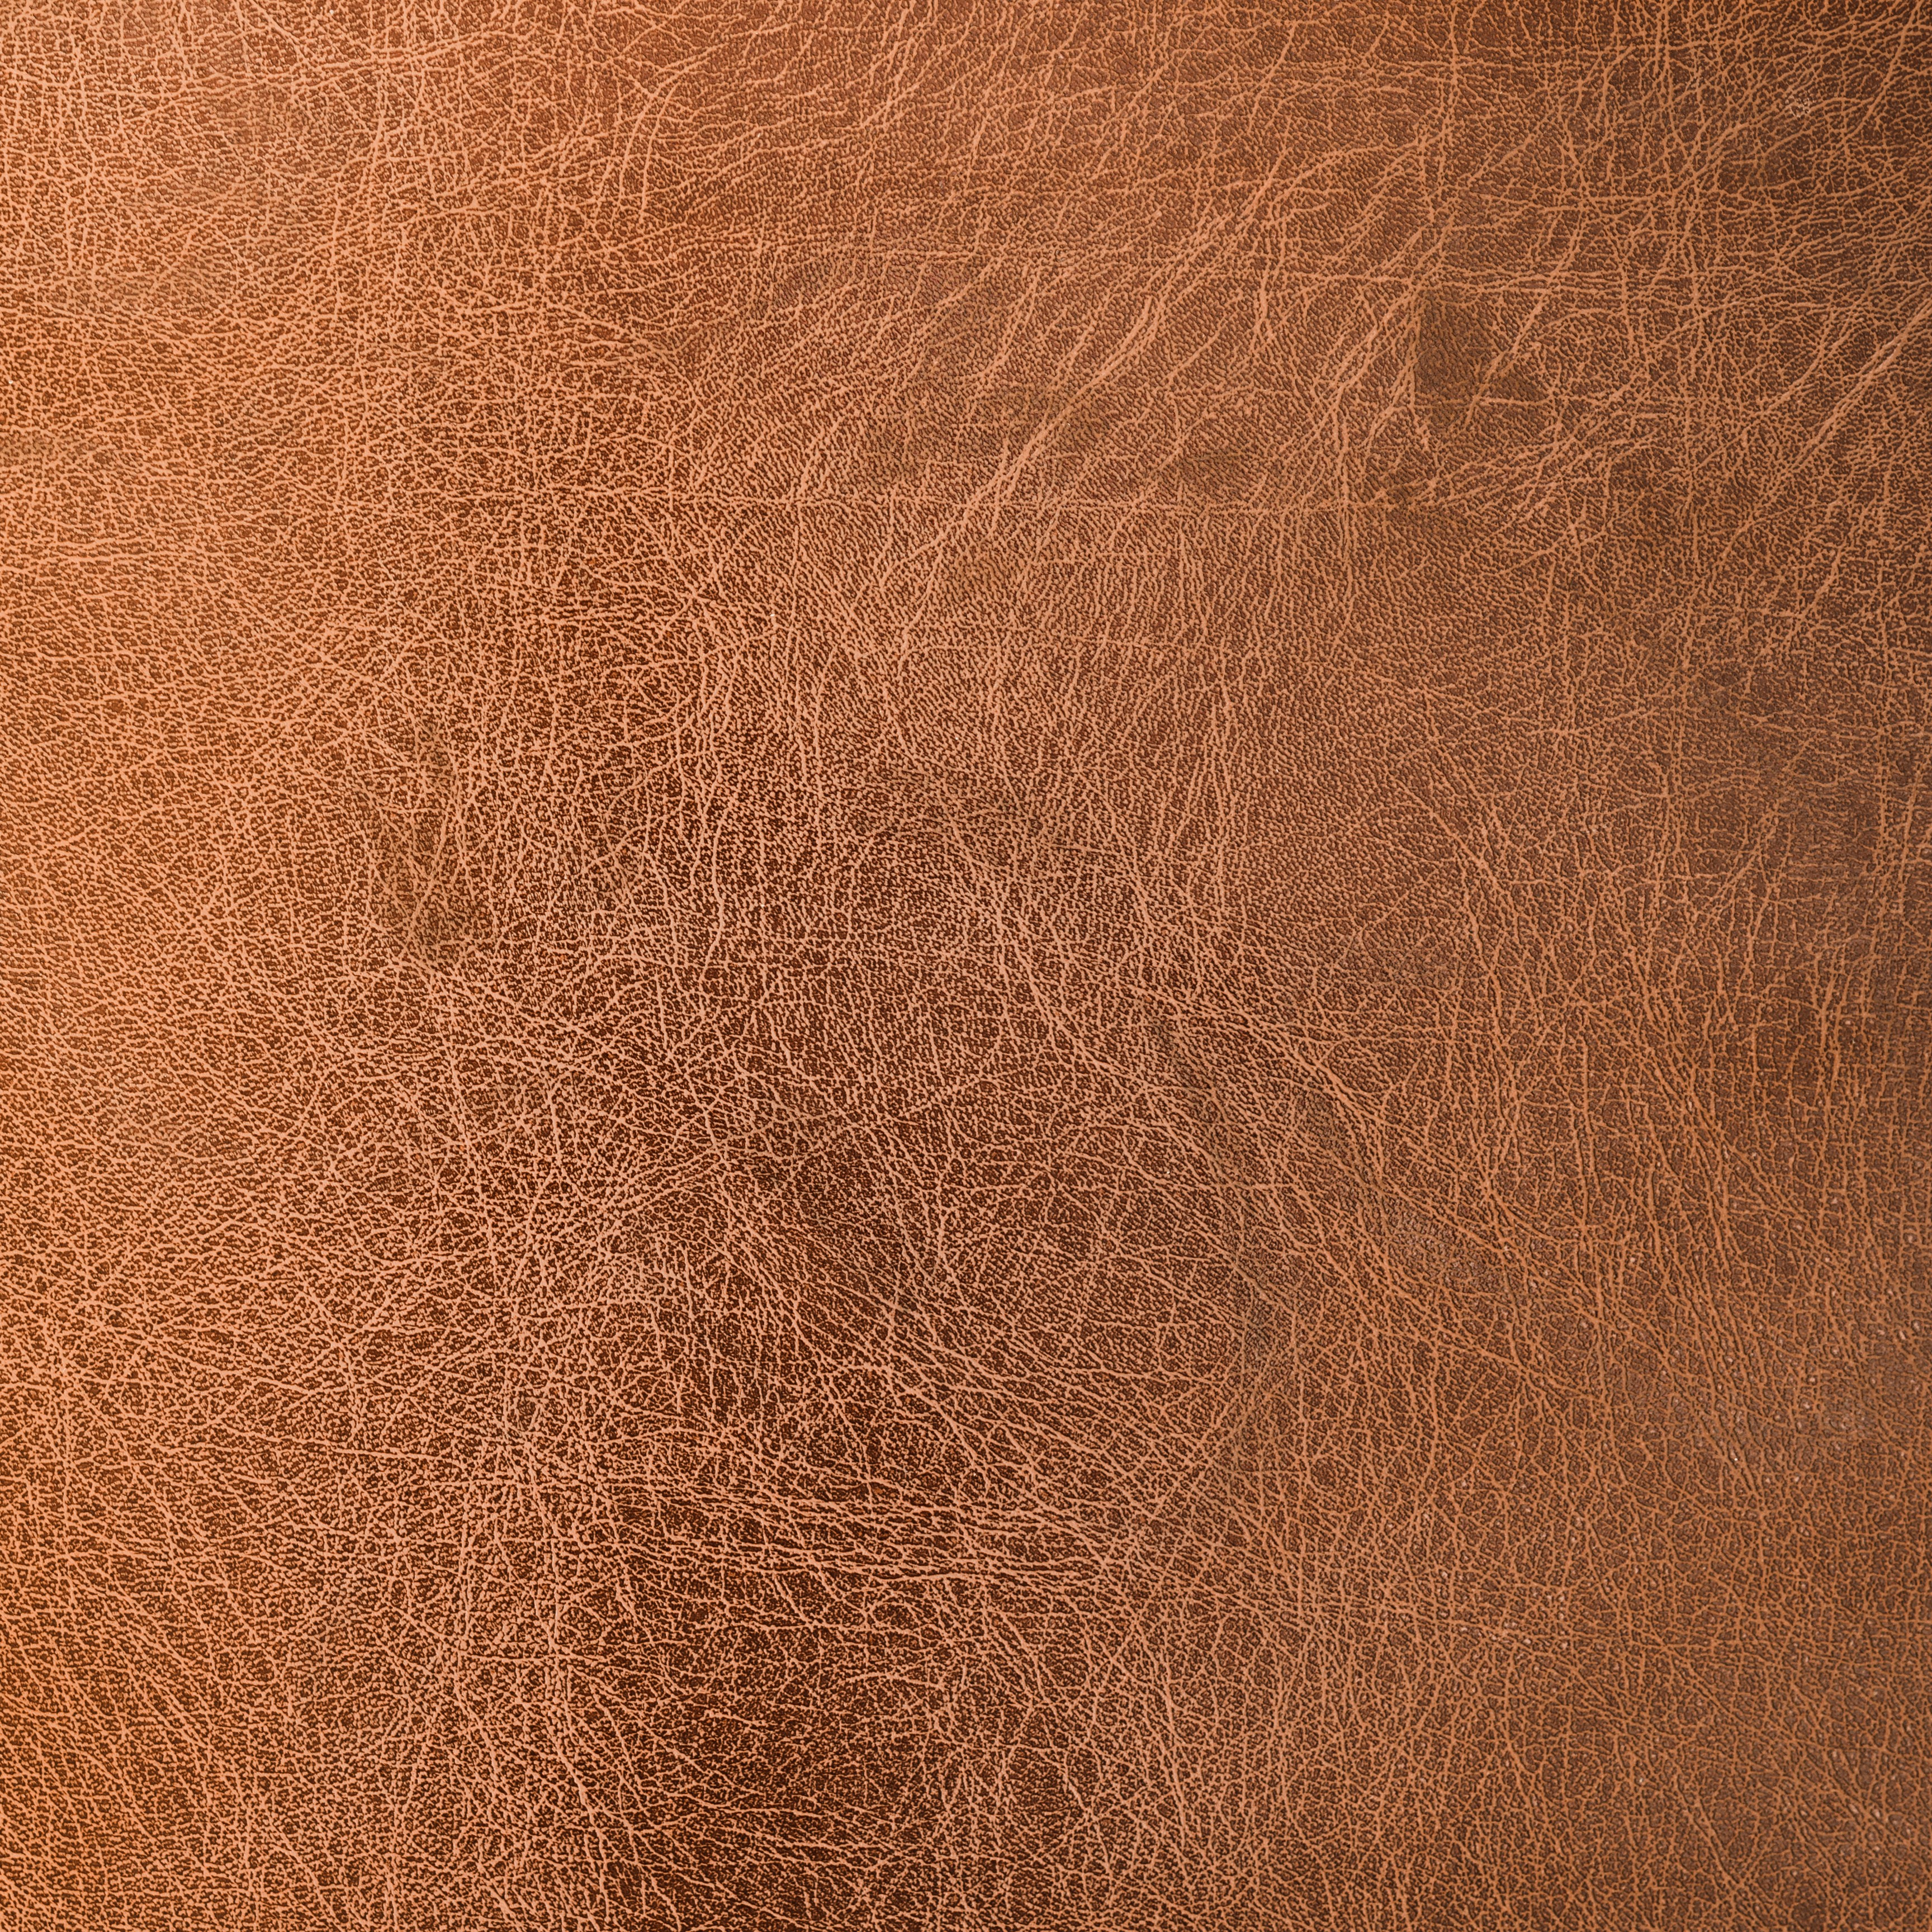 BRESSER Flat Lay Background for Tabletop Photography 60 x 60cm Leather Look Rust-Brown